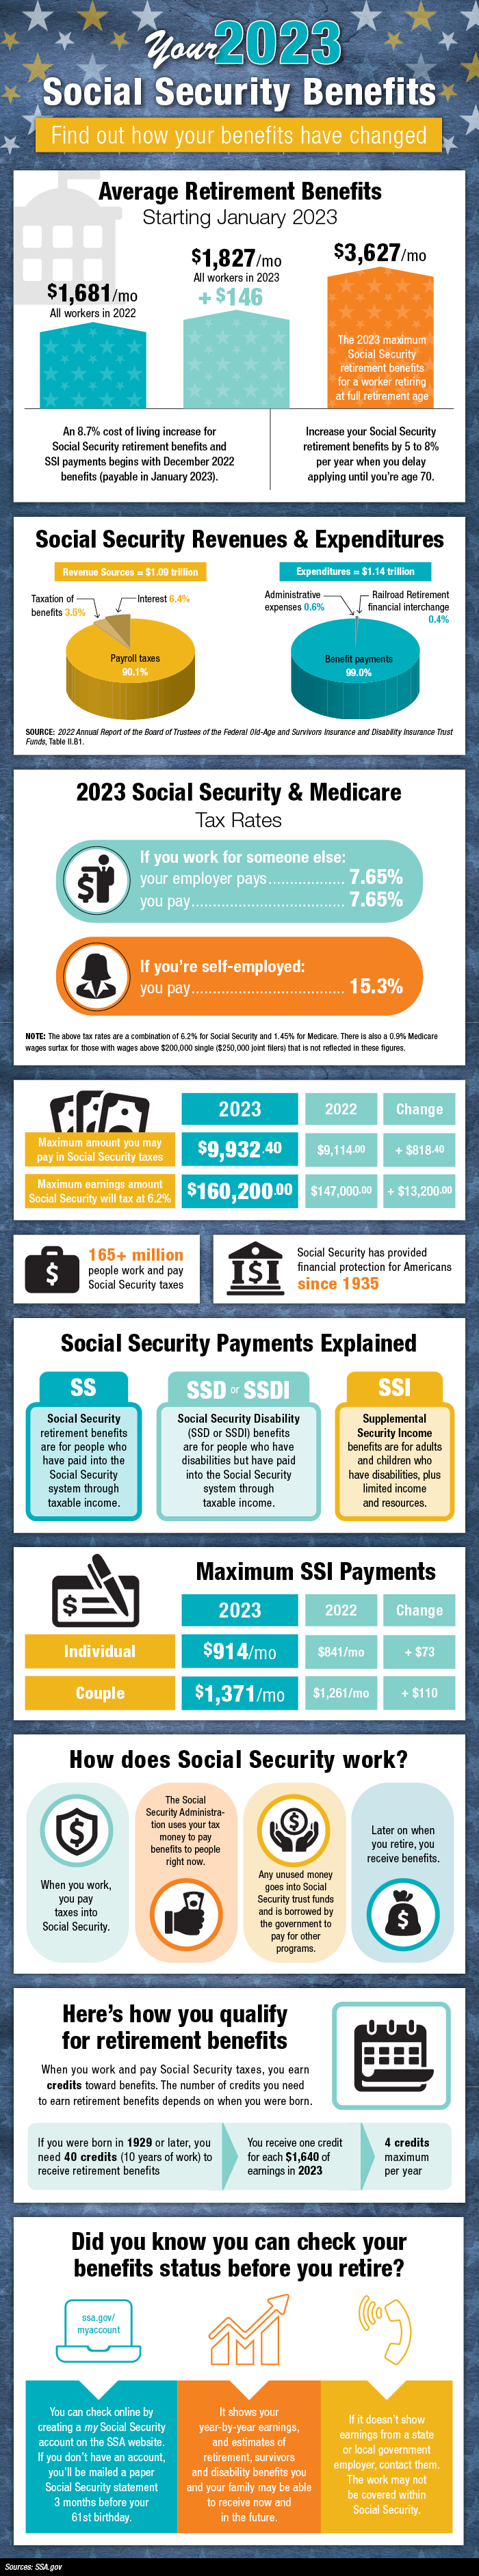 Social Security Infographic image